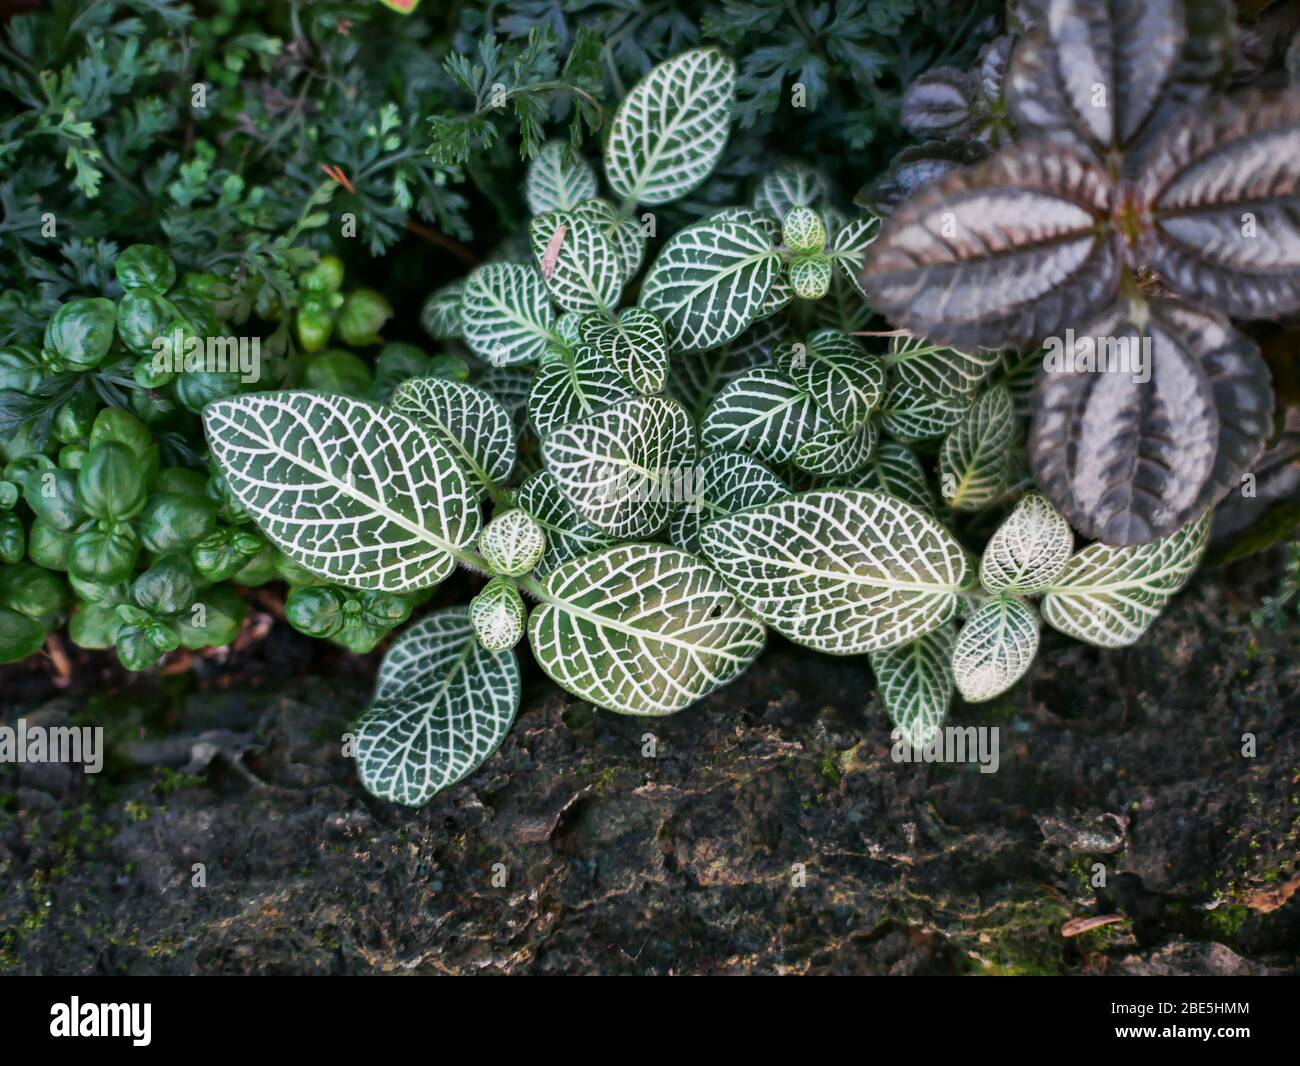 Small ornamental plants used for gardening trays. Stock Photo